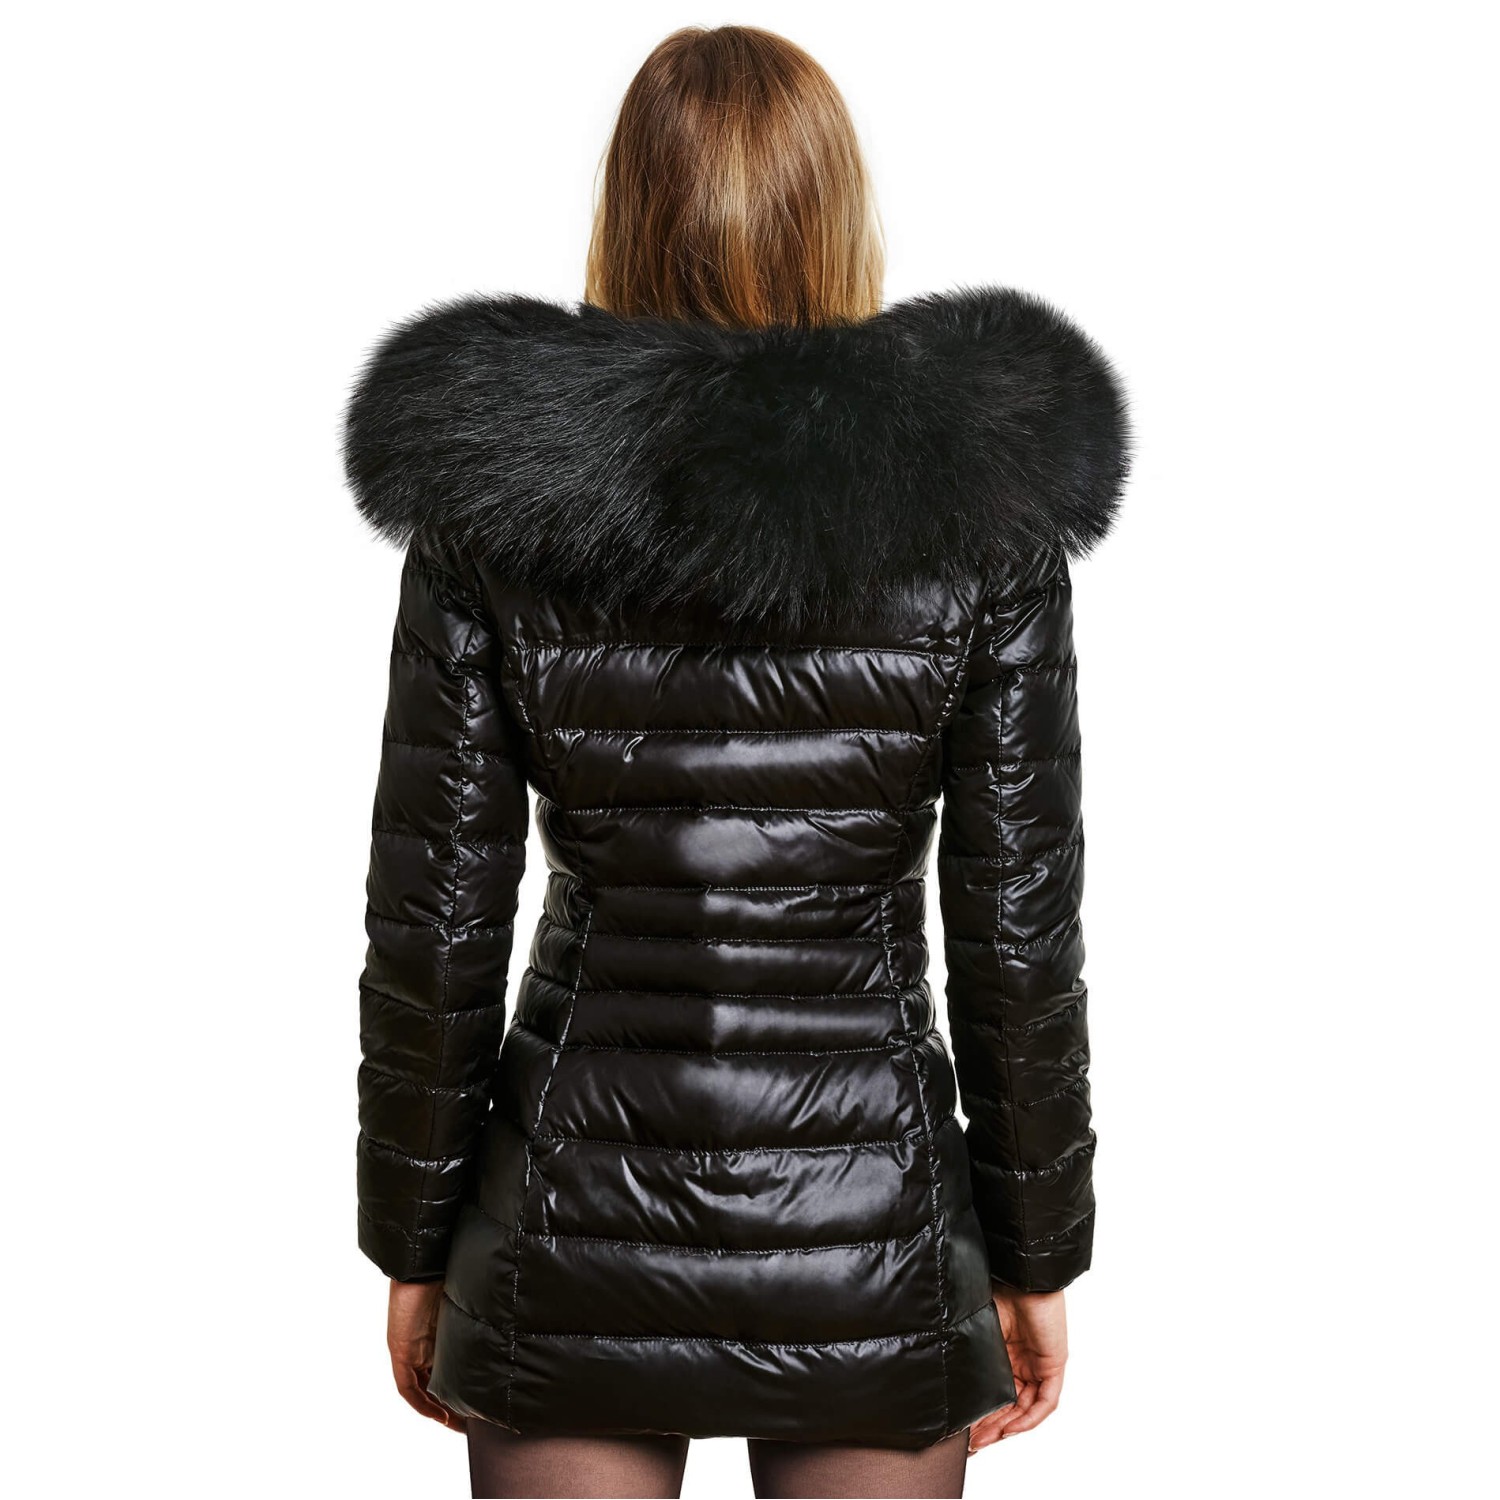 Down jacket with fake fur